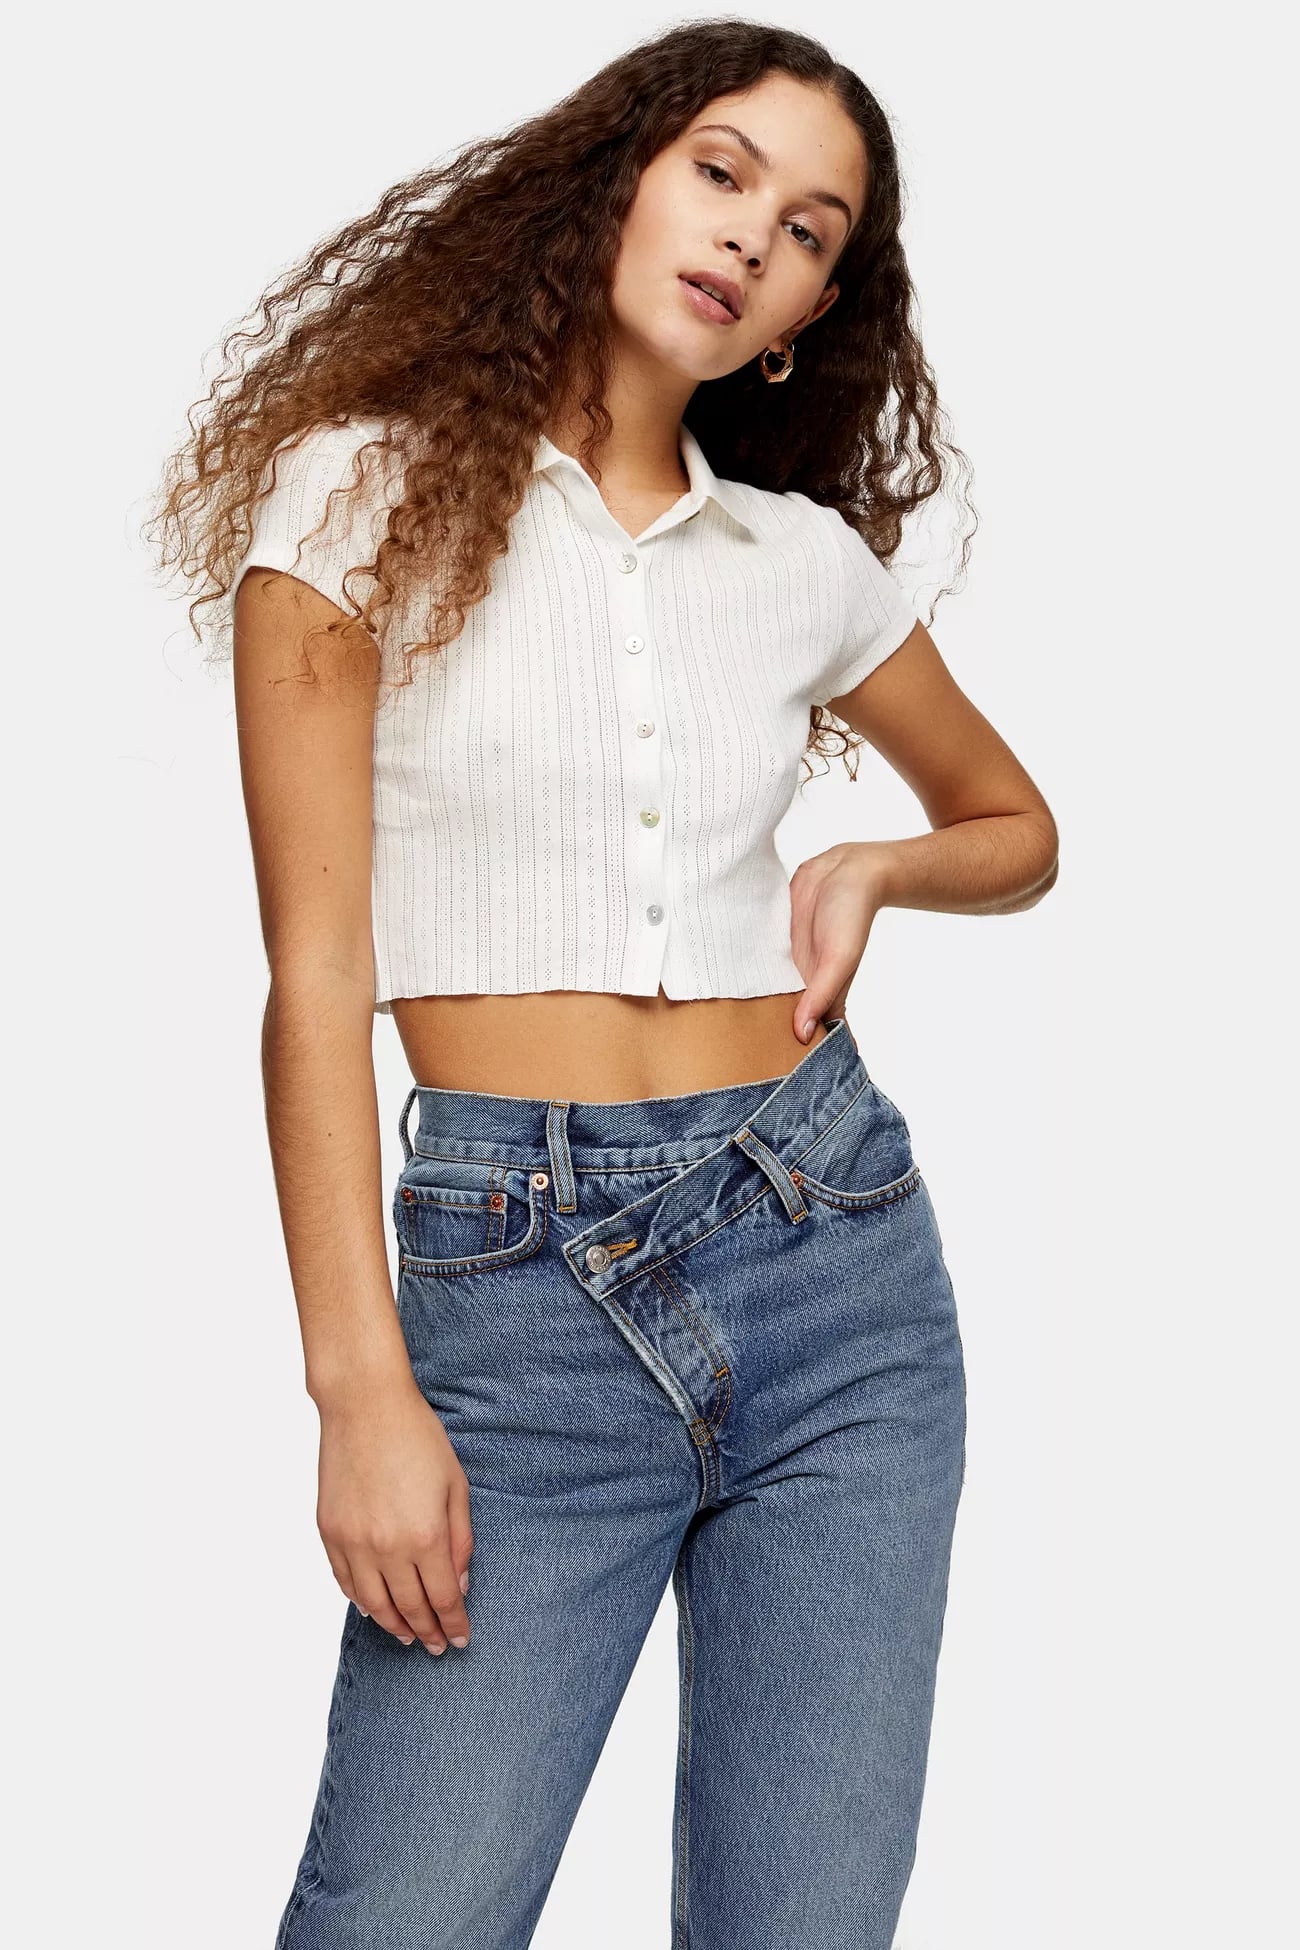 cropped t shirt outfit